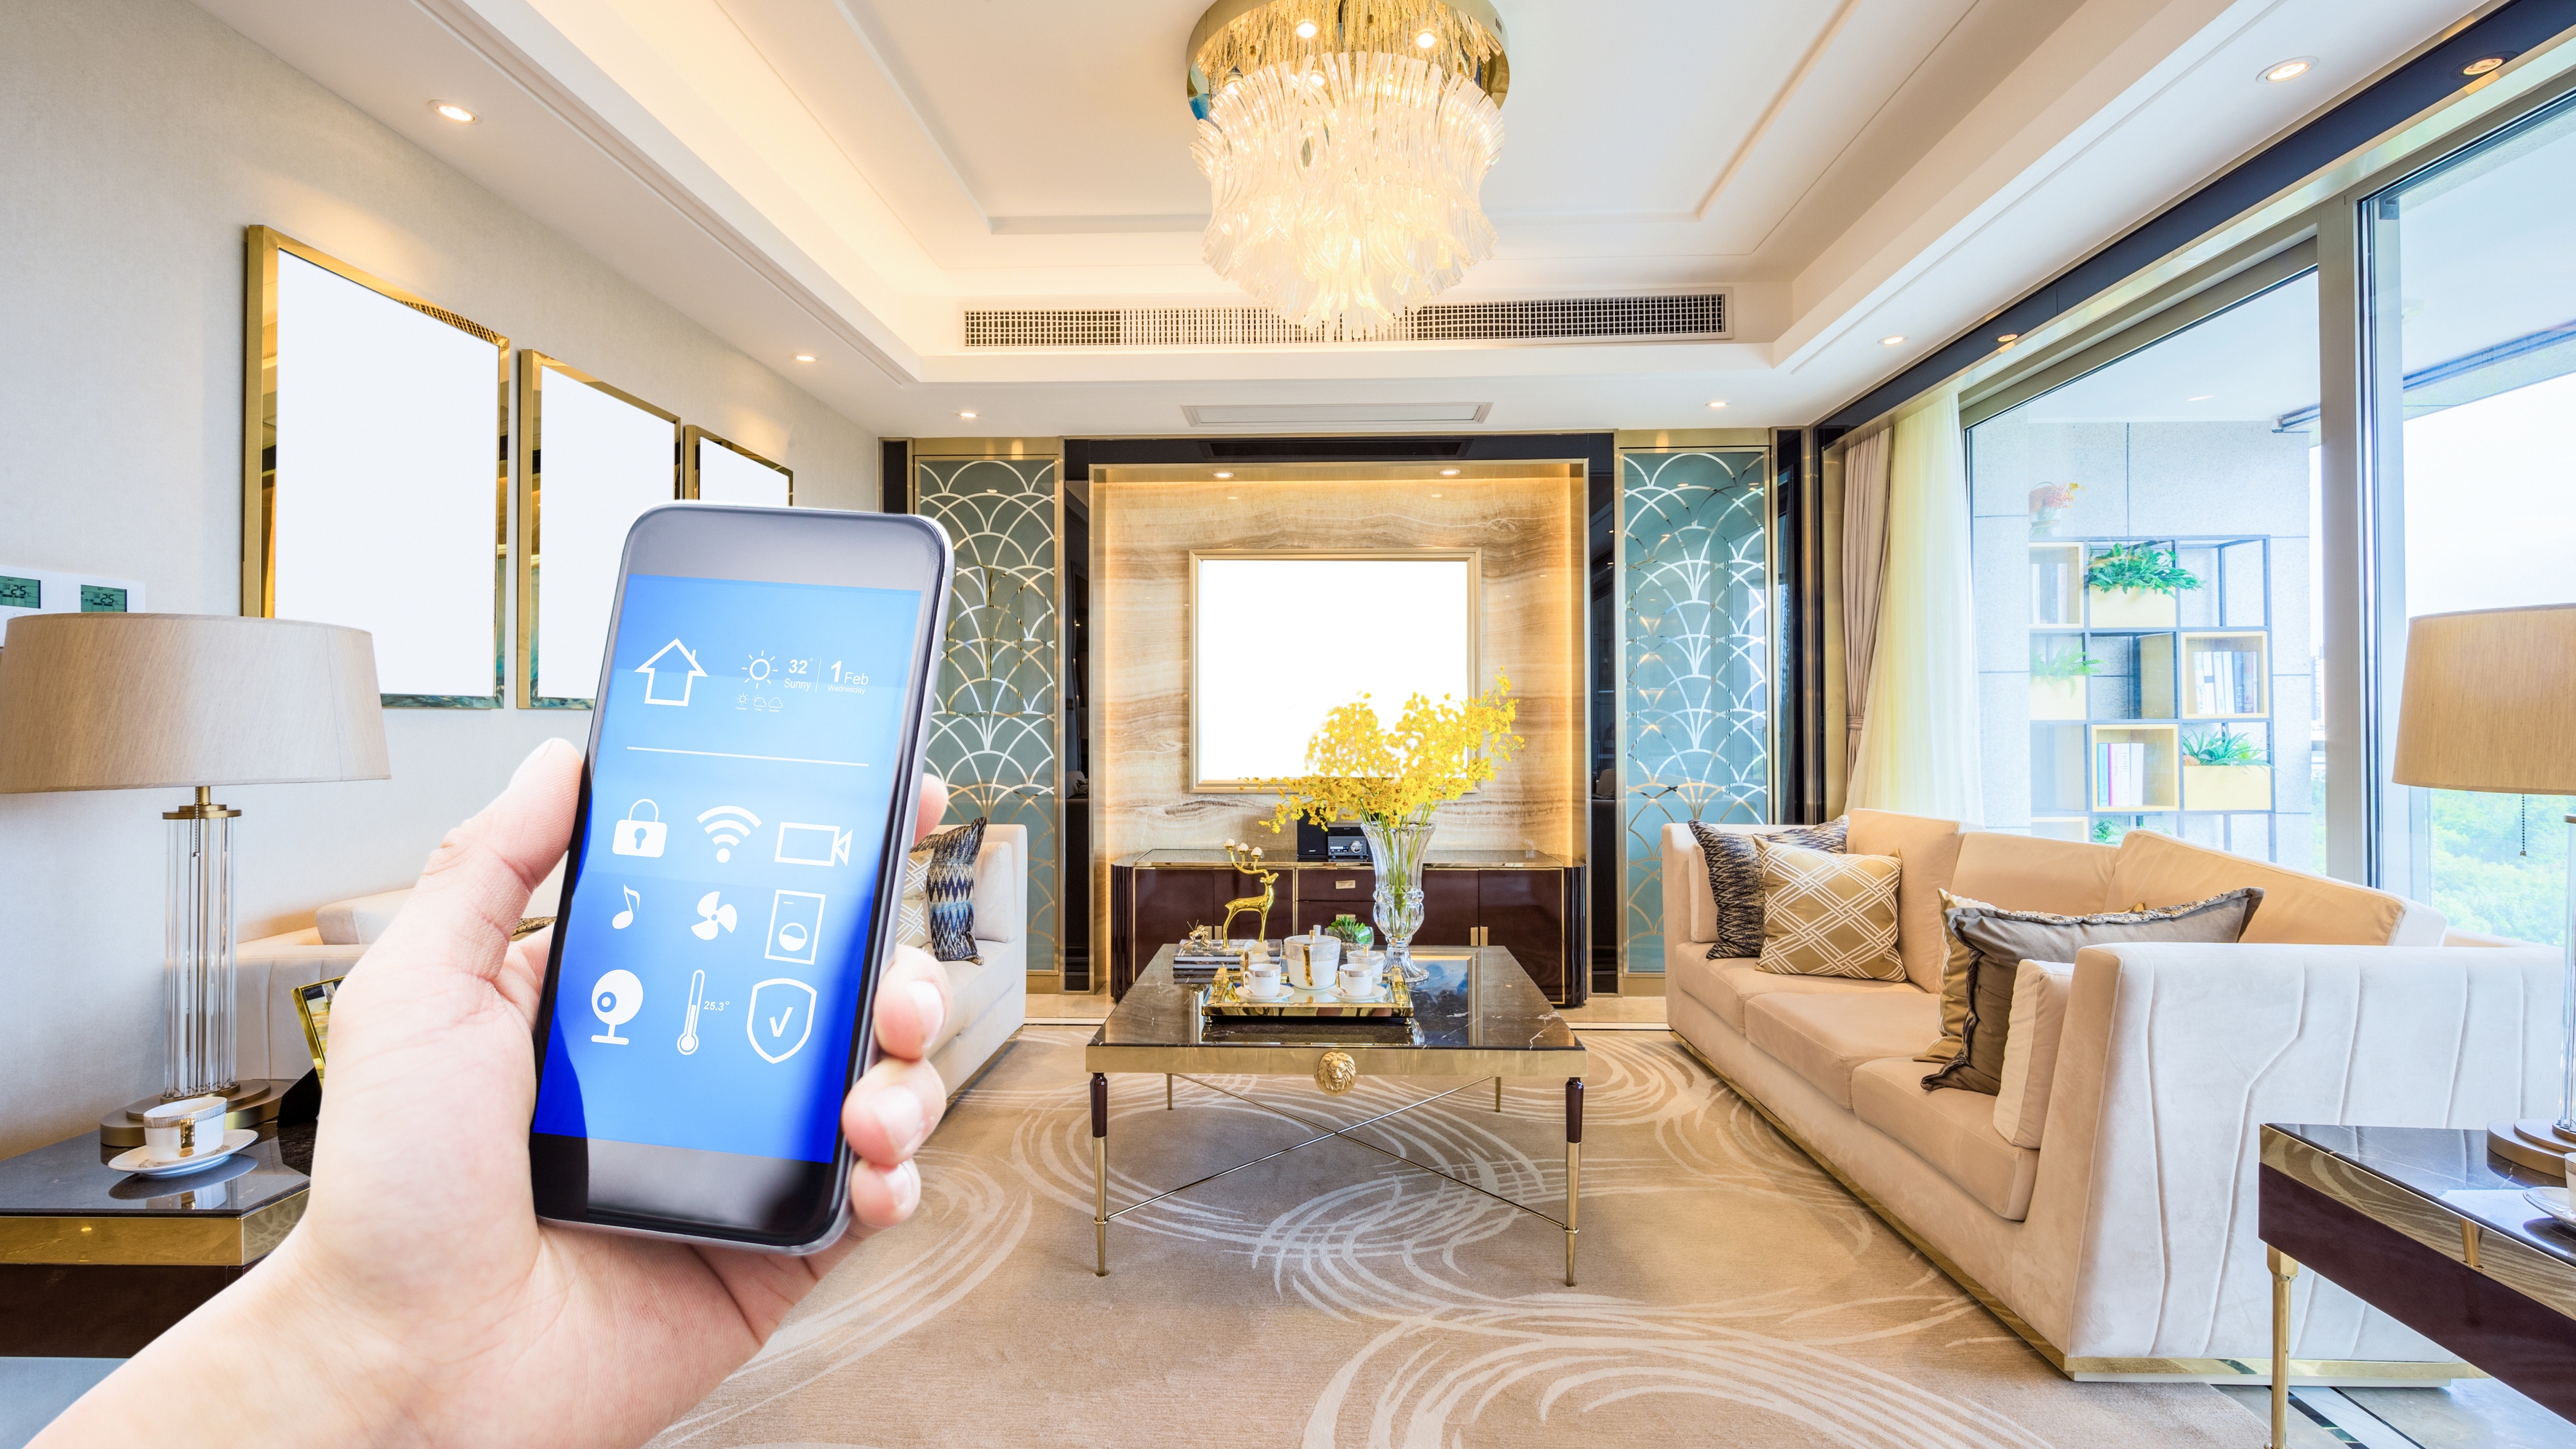 A modern smart home with connected devices such as a thermostat and security cameras, being controlled wirelessly from a mobile devices